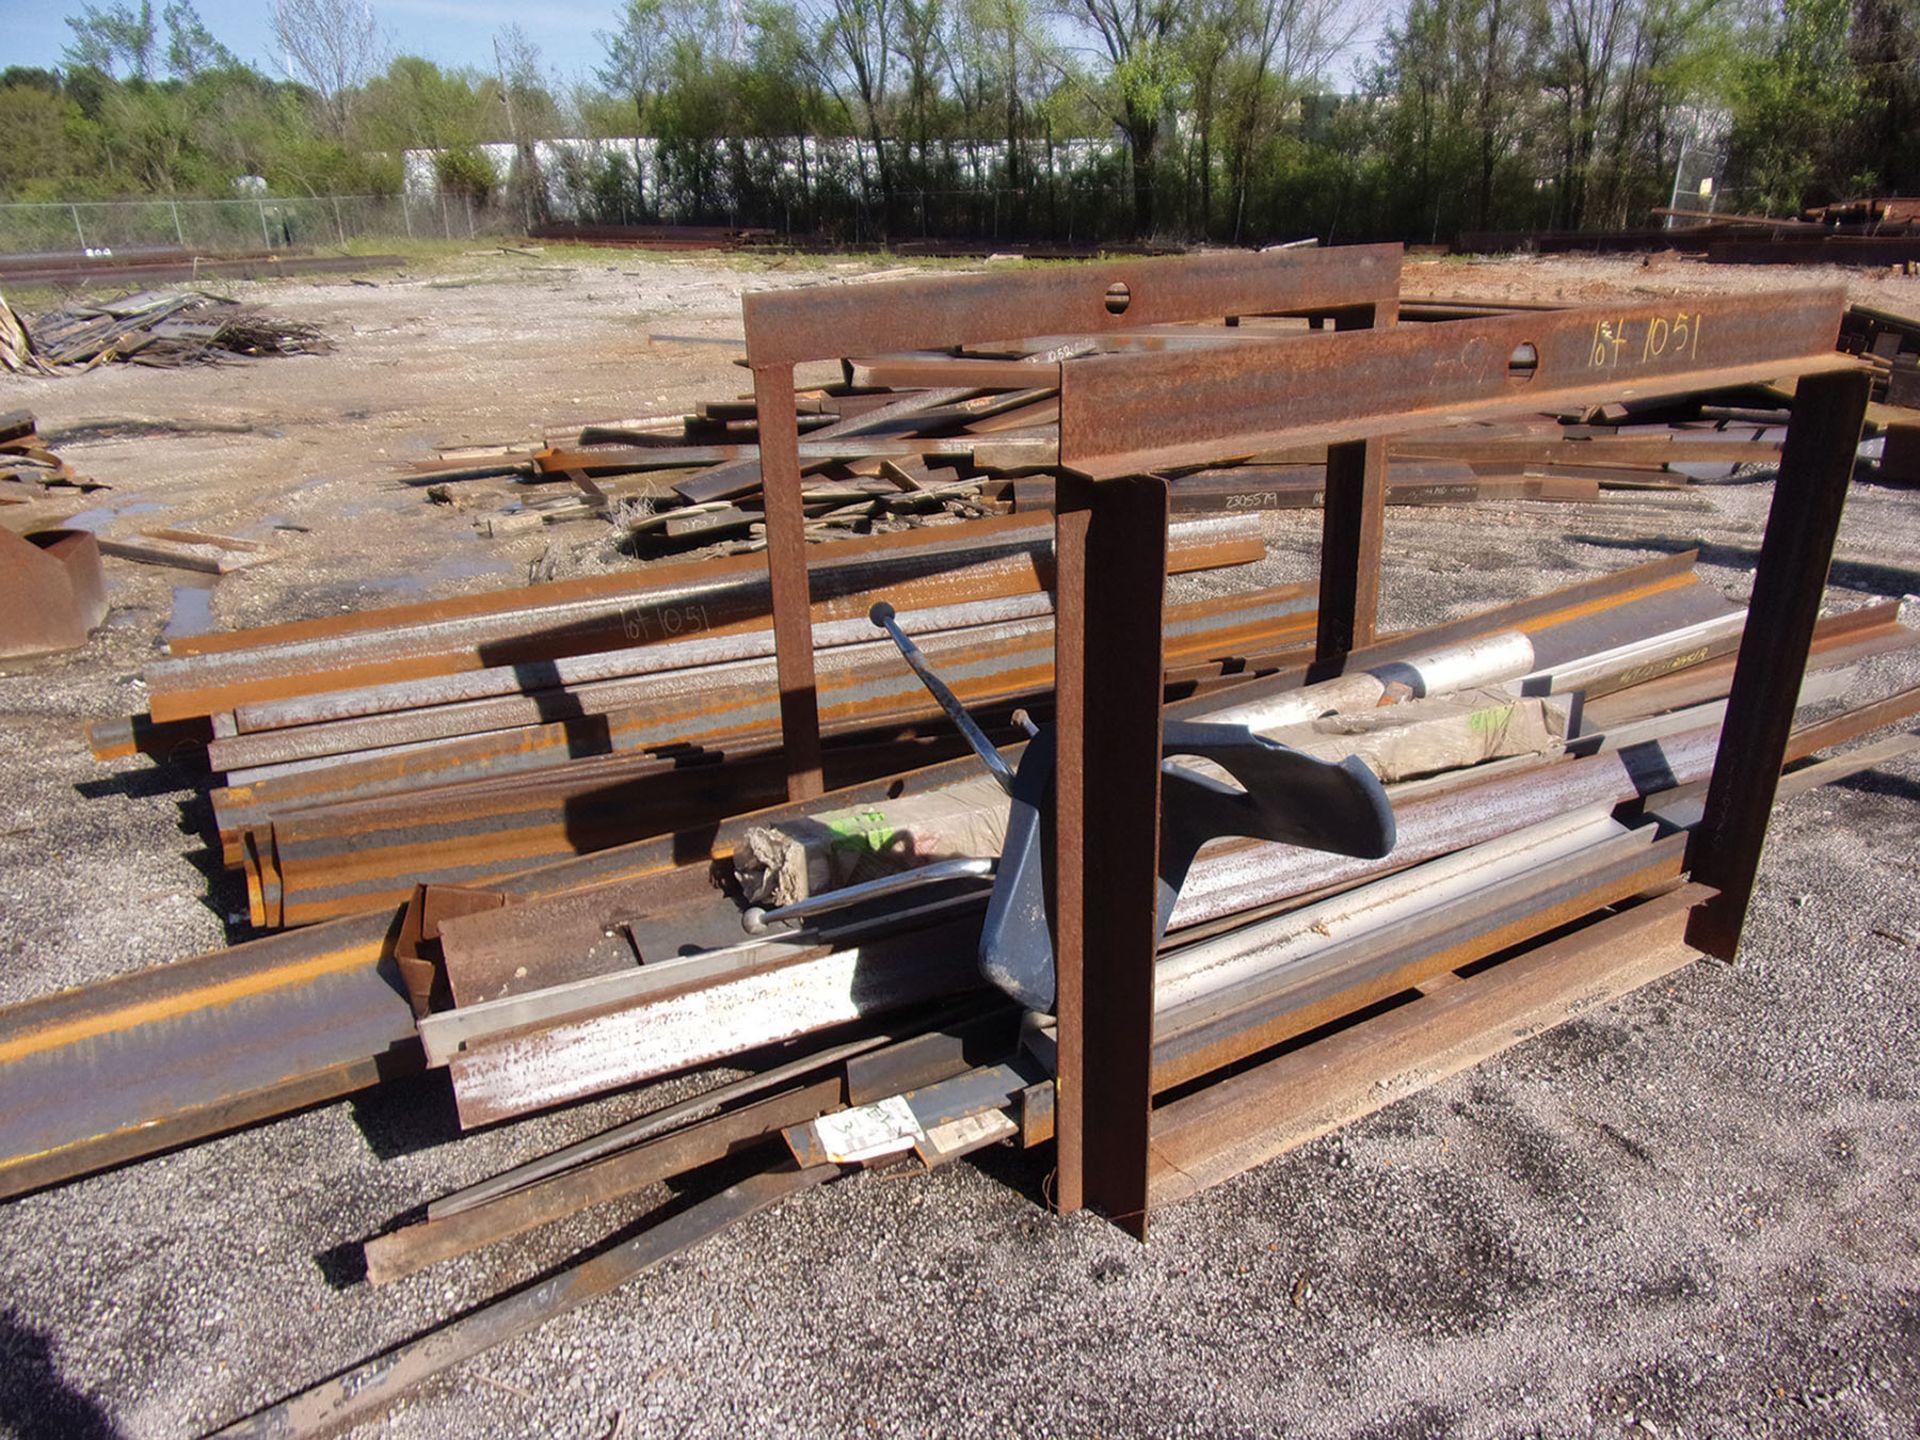 LOT OF CHANNEL & ANGLE STEEL